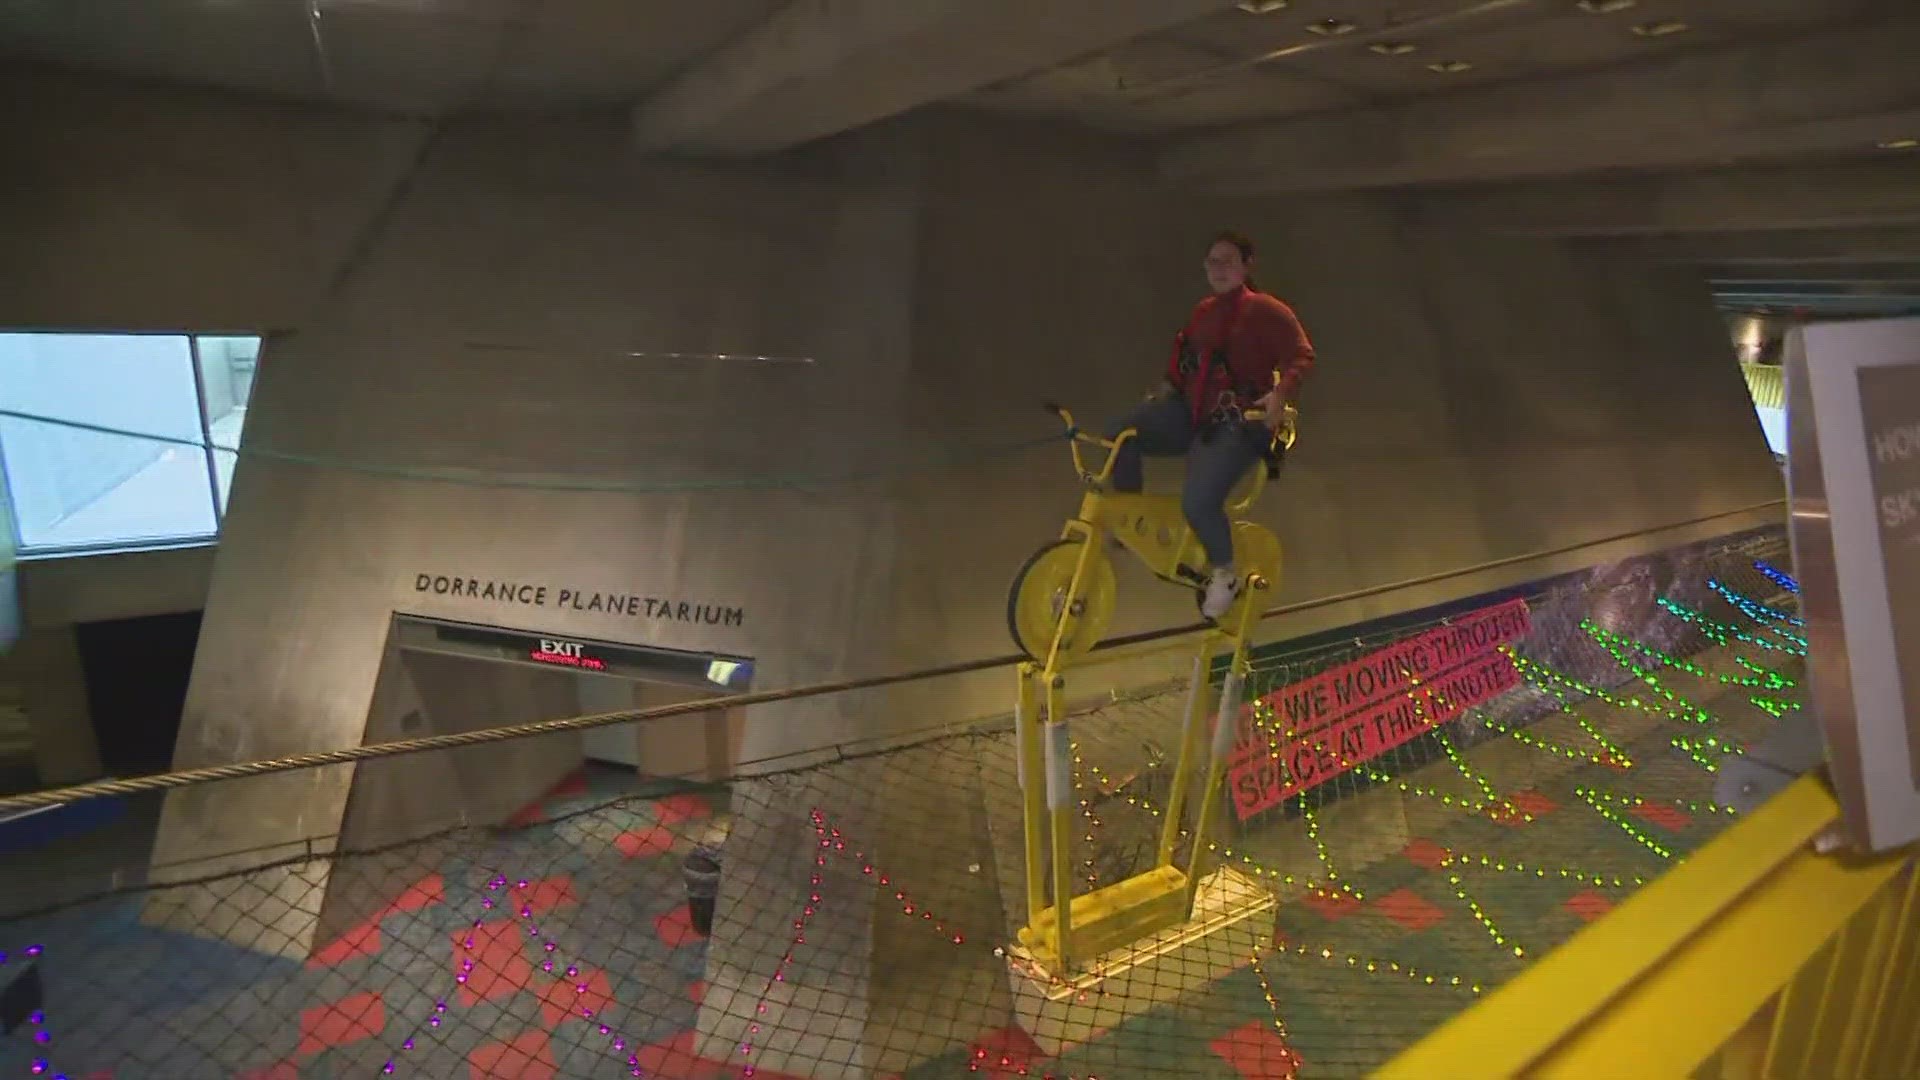 The SkyCycle teaches counterbalance and center of gravity... if you dare try it.